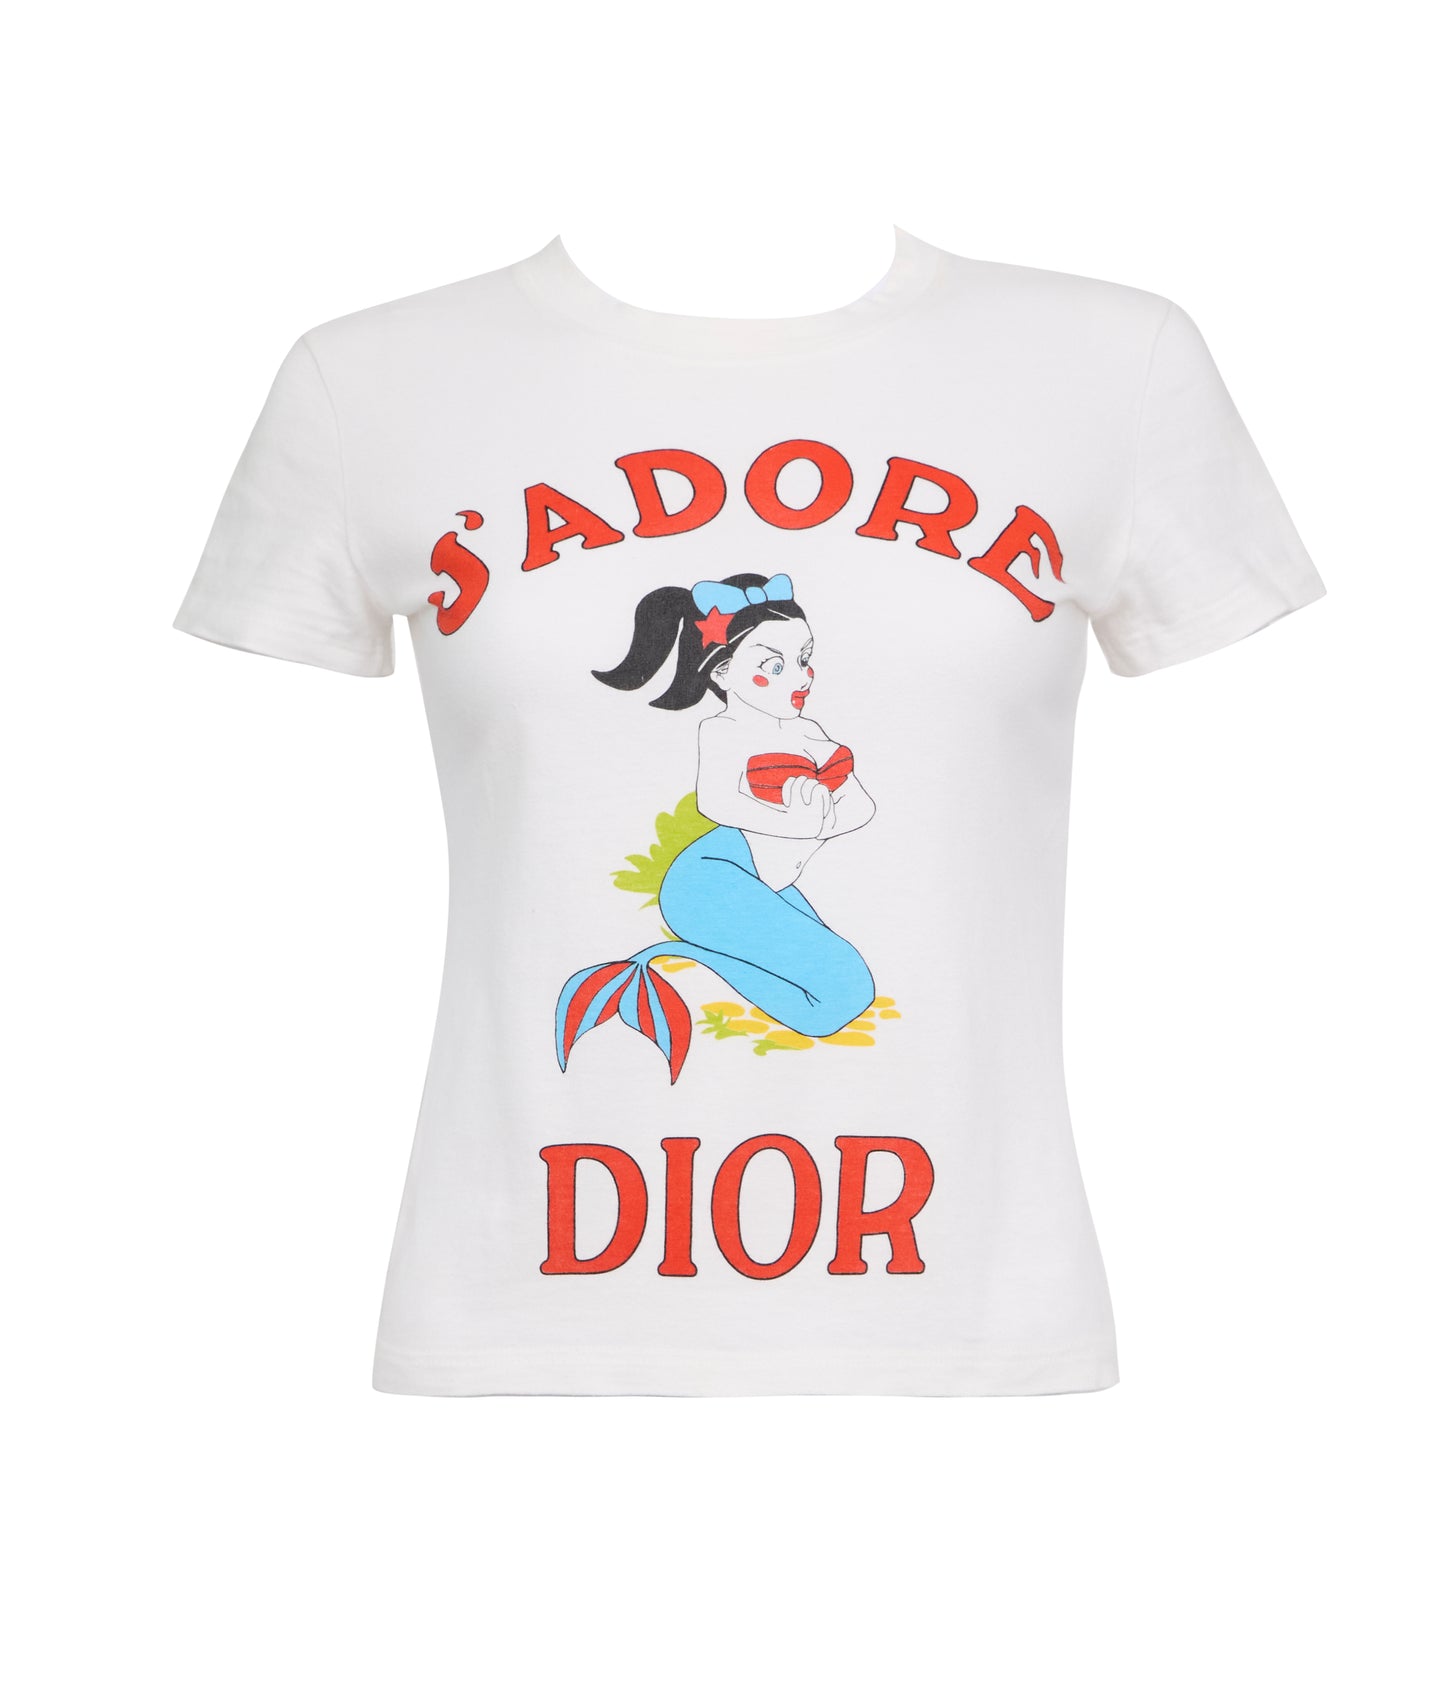 Pre-Owned Christian Dior T-Shirt